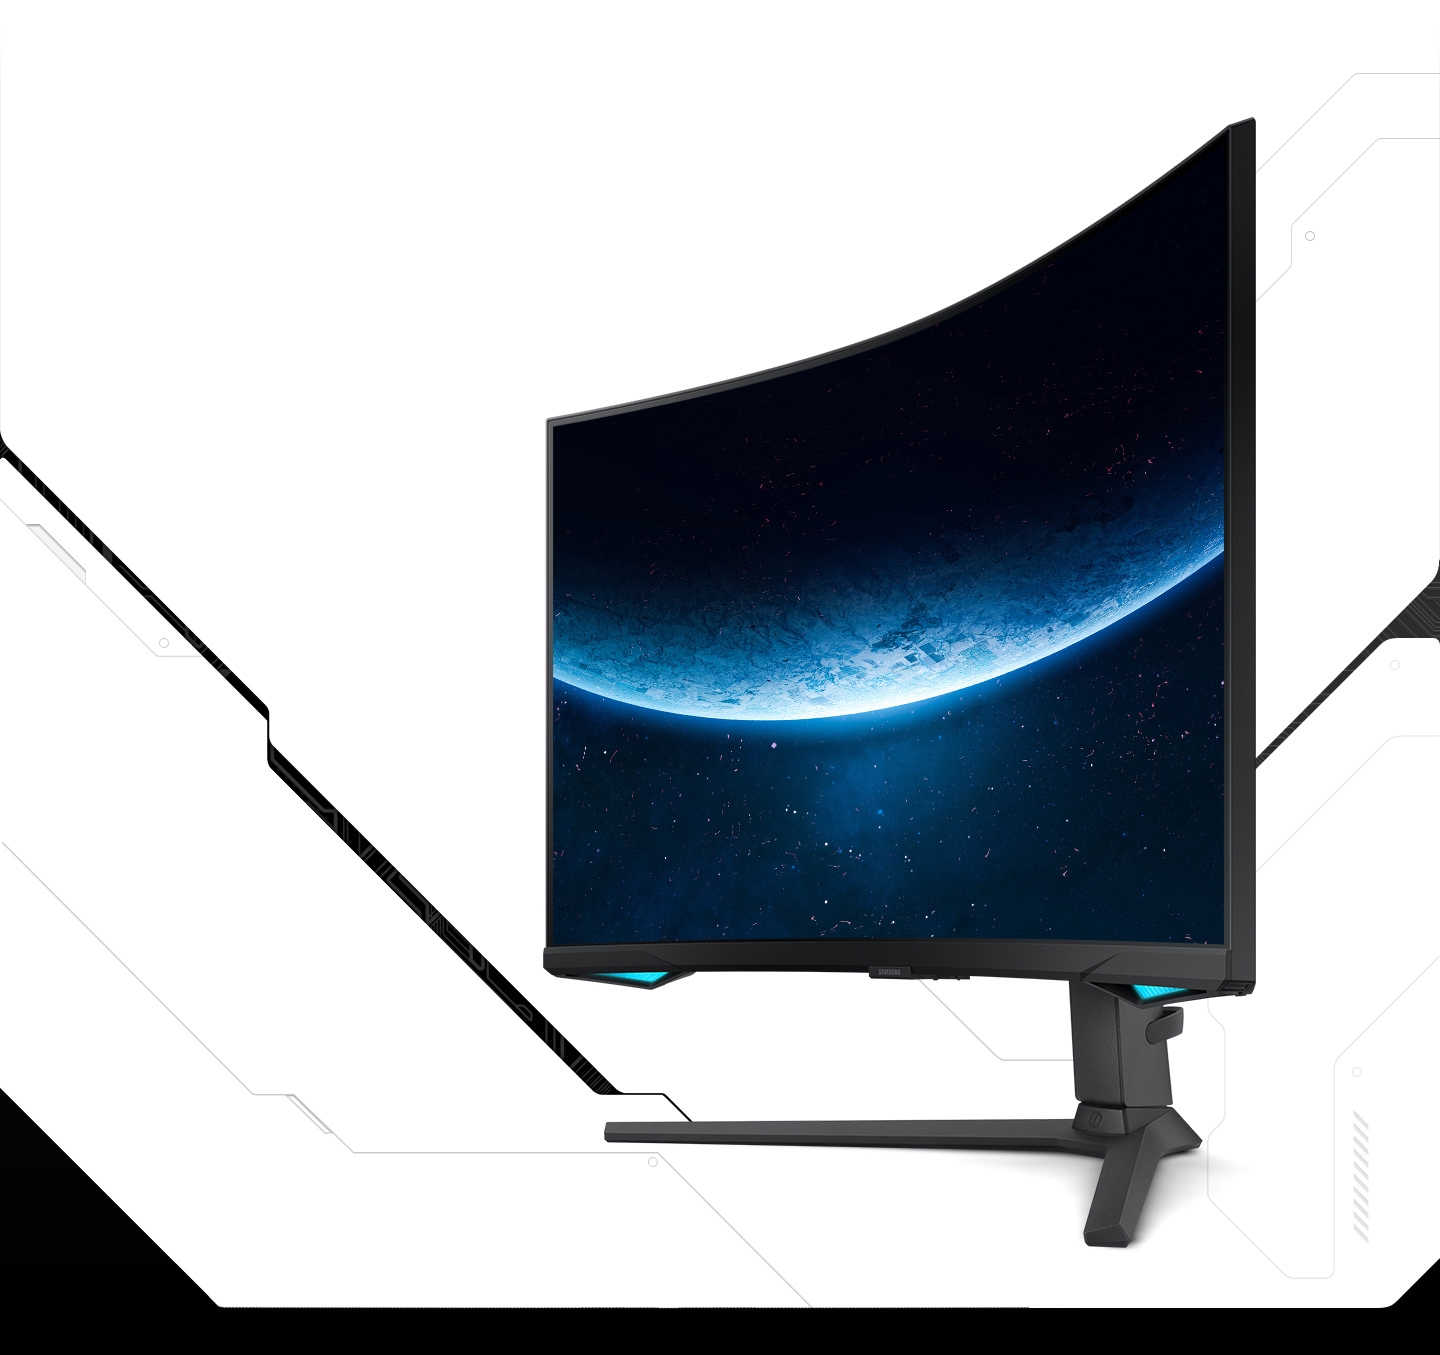 On the monitor display which is pivoted slightly to the left,  the bottom edge of a planet is illuminated by a sunrise.